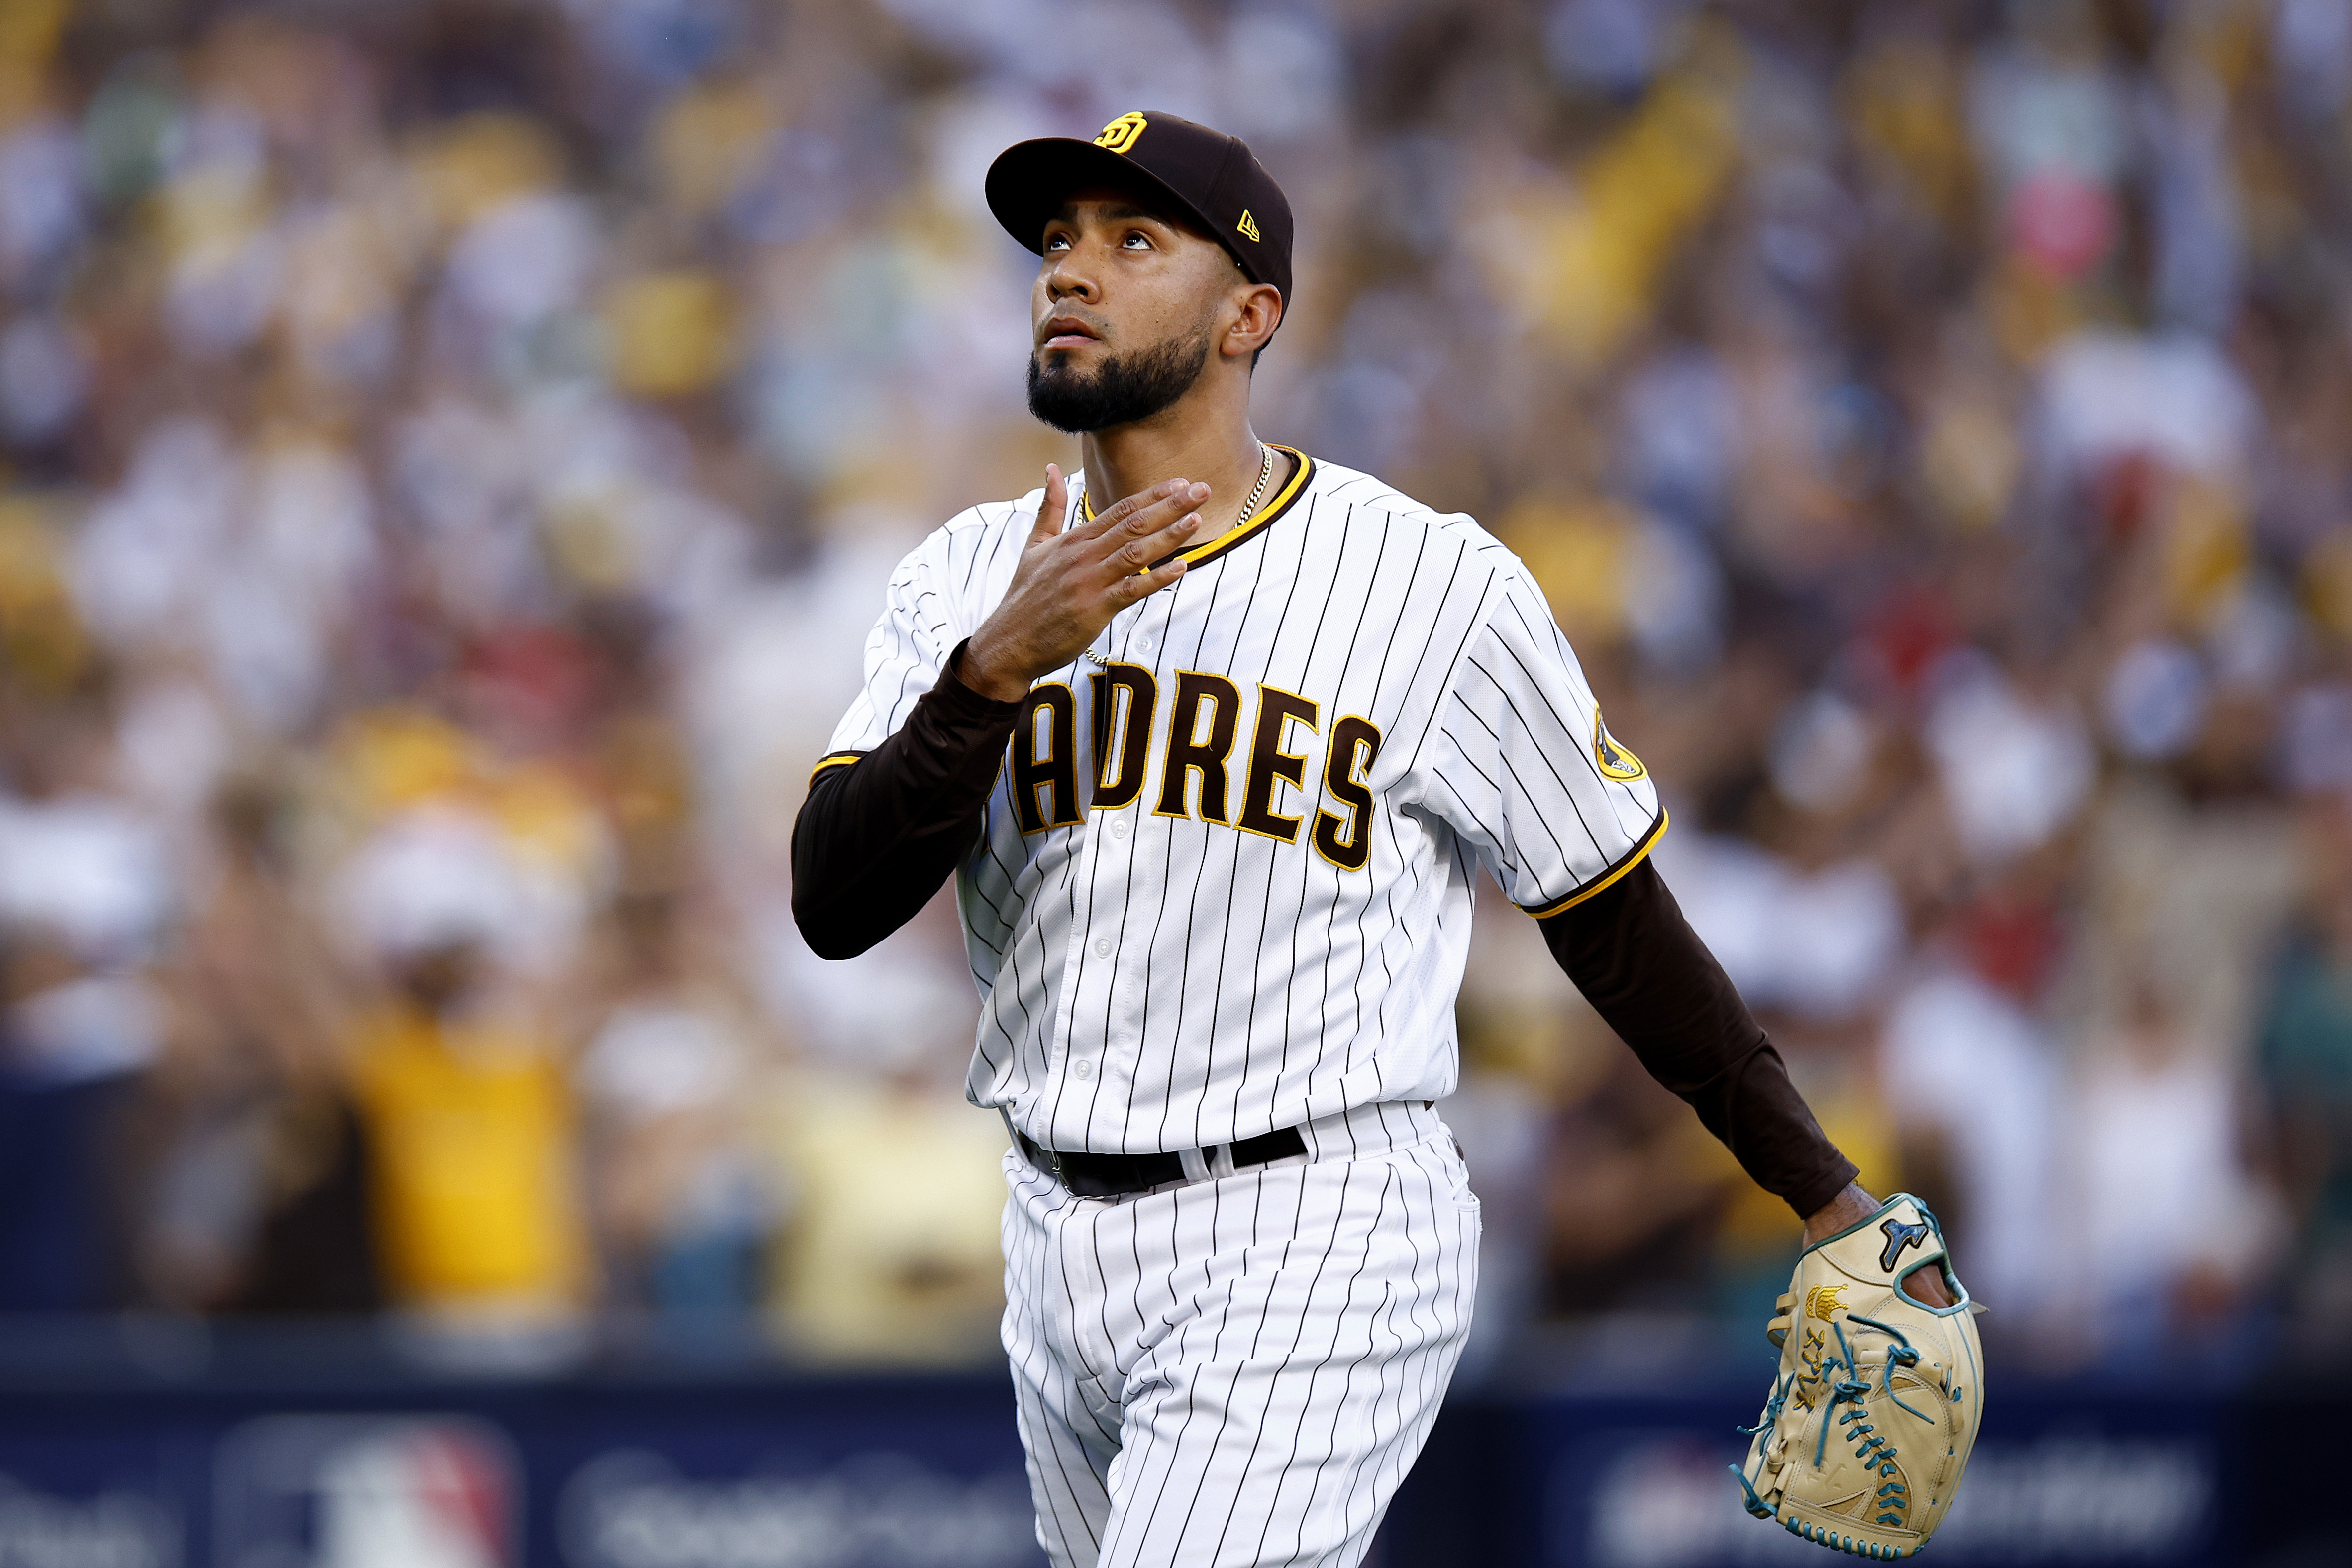 Pitcher Robert Suarez of the San Diego Padres looks on after pitching during the eighth inning in Game 2 of the National League Championship Series at PETCO Park in San Diego, California, October 19, 2022. /CFP 